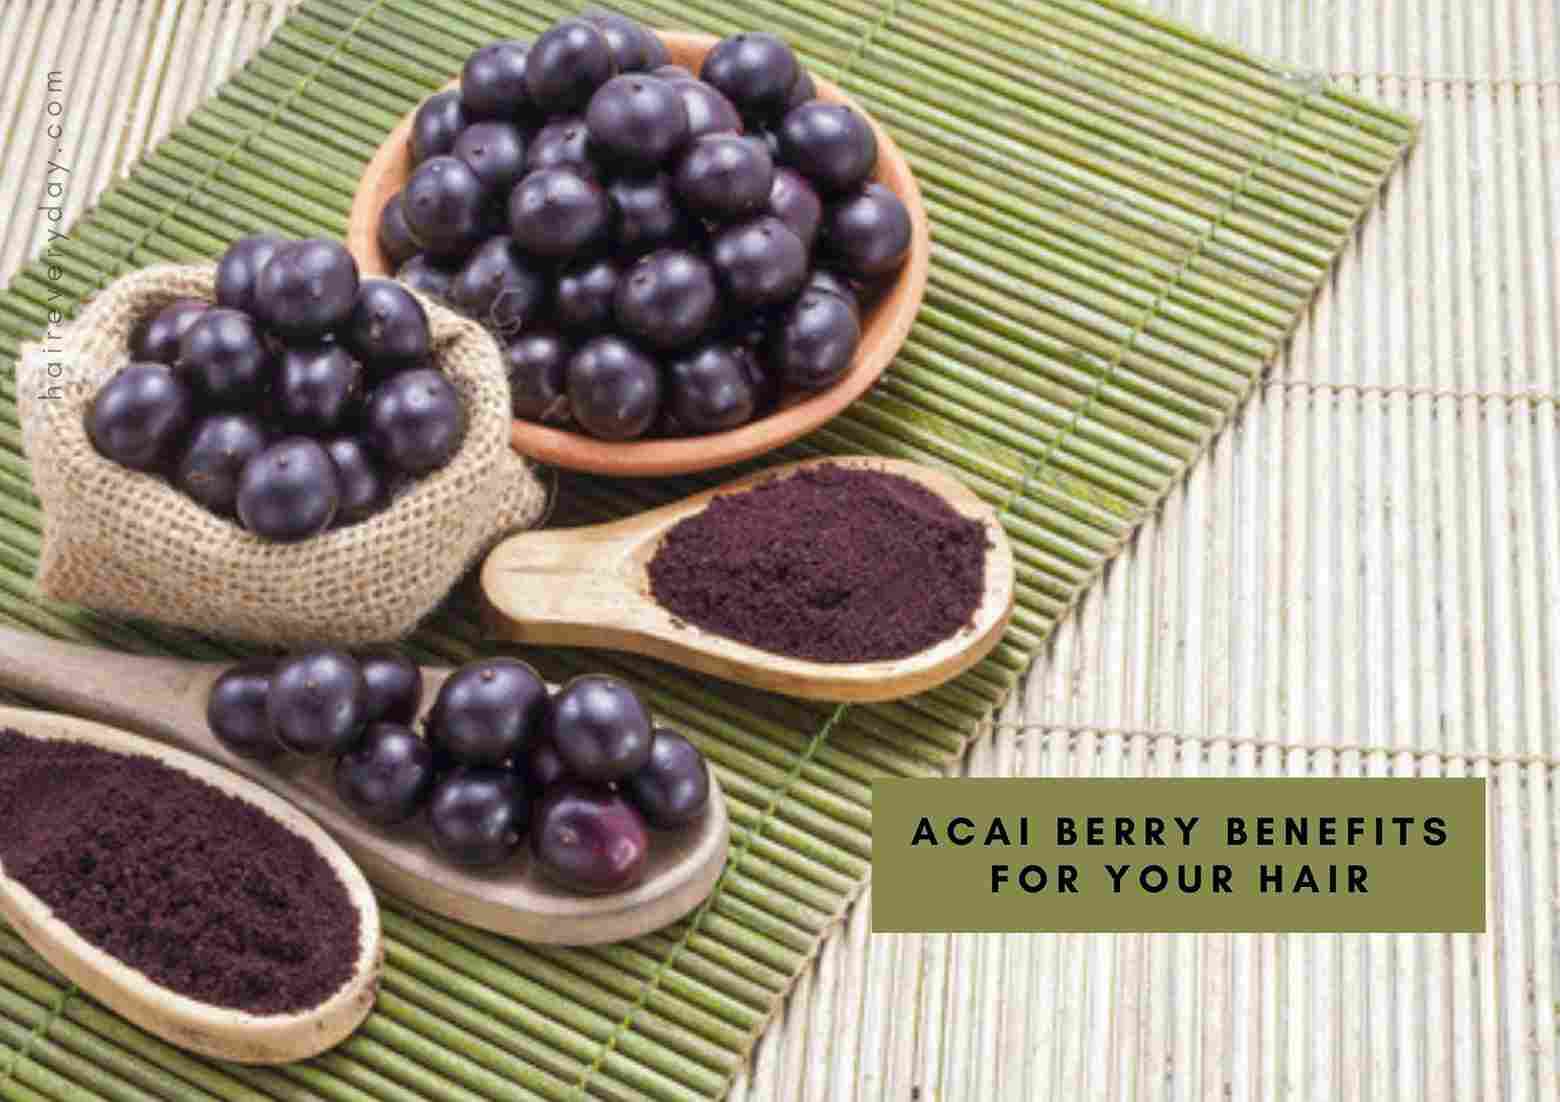 Benefits of Acai Berries For Health, Skin and Hair - Down to Earth Skin Care